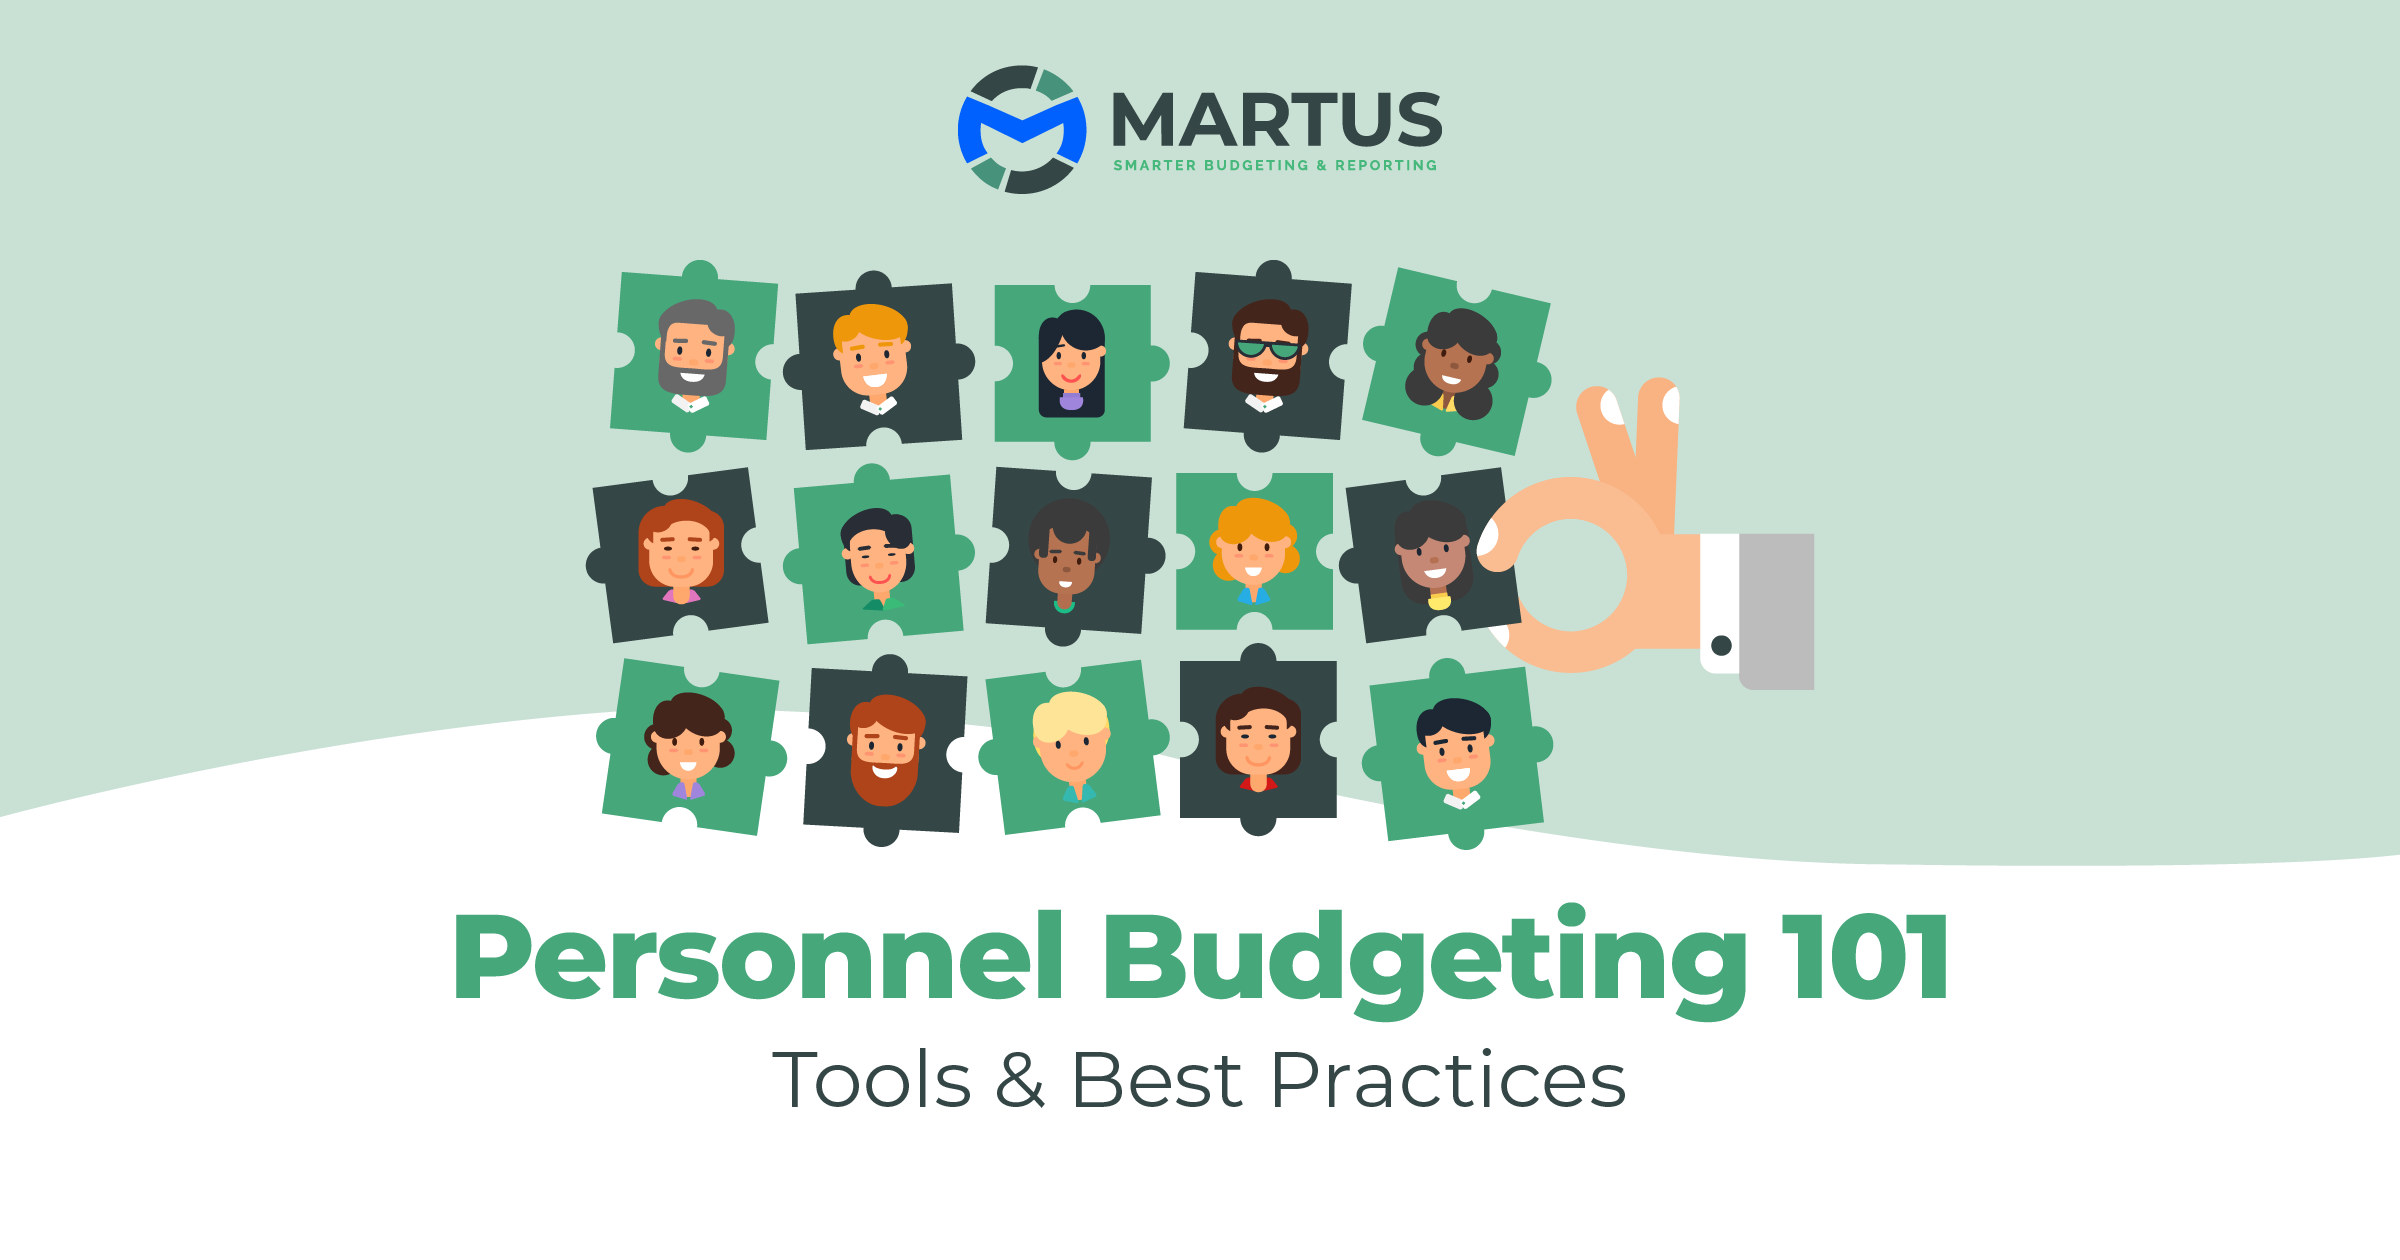 Personnel Budgeting 101: Tools & Best Practices